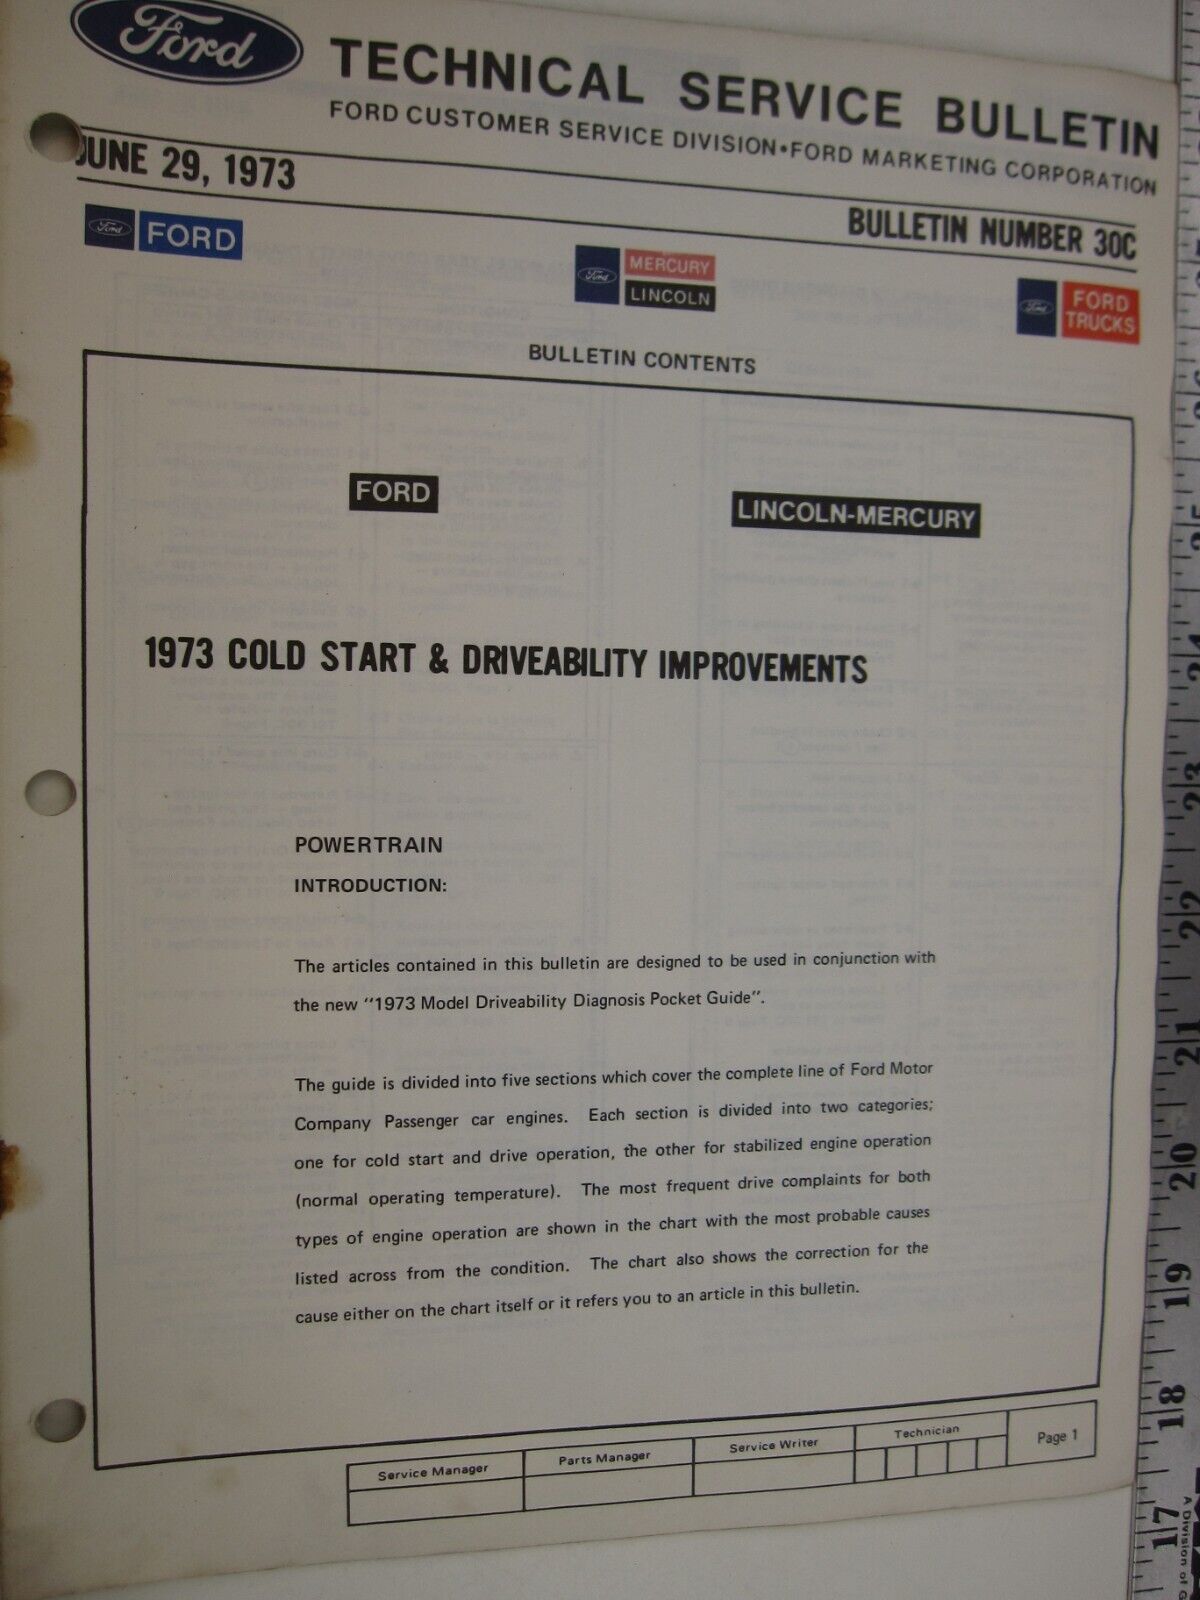 June 29, 1973 FORD Technical Service Bulletin Number 30C   BIS